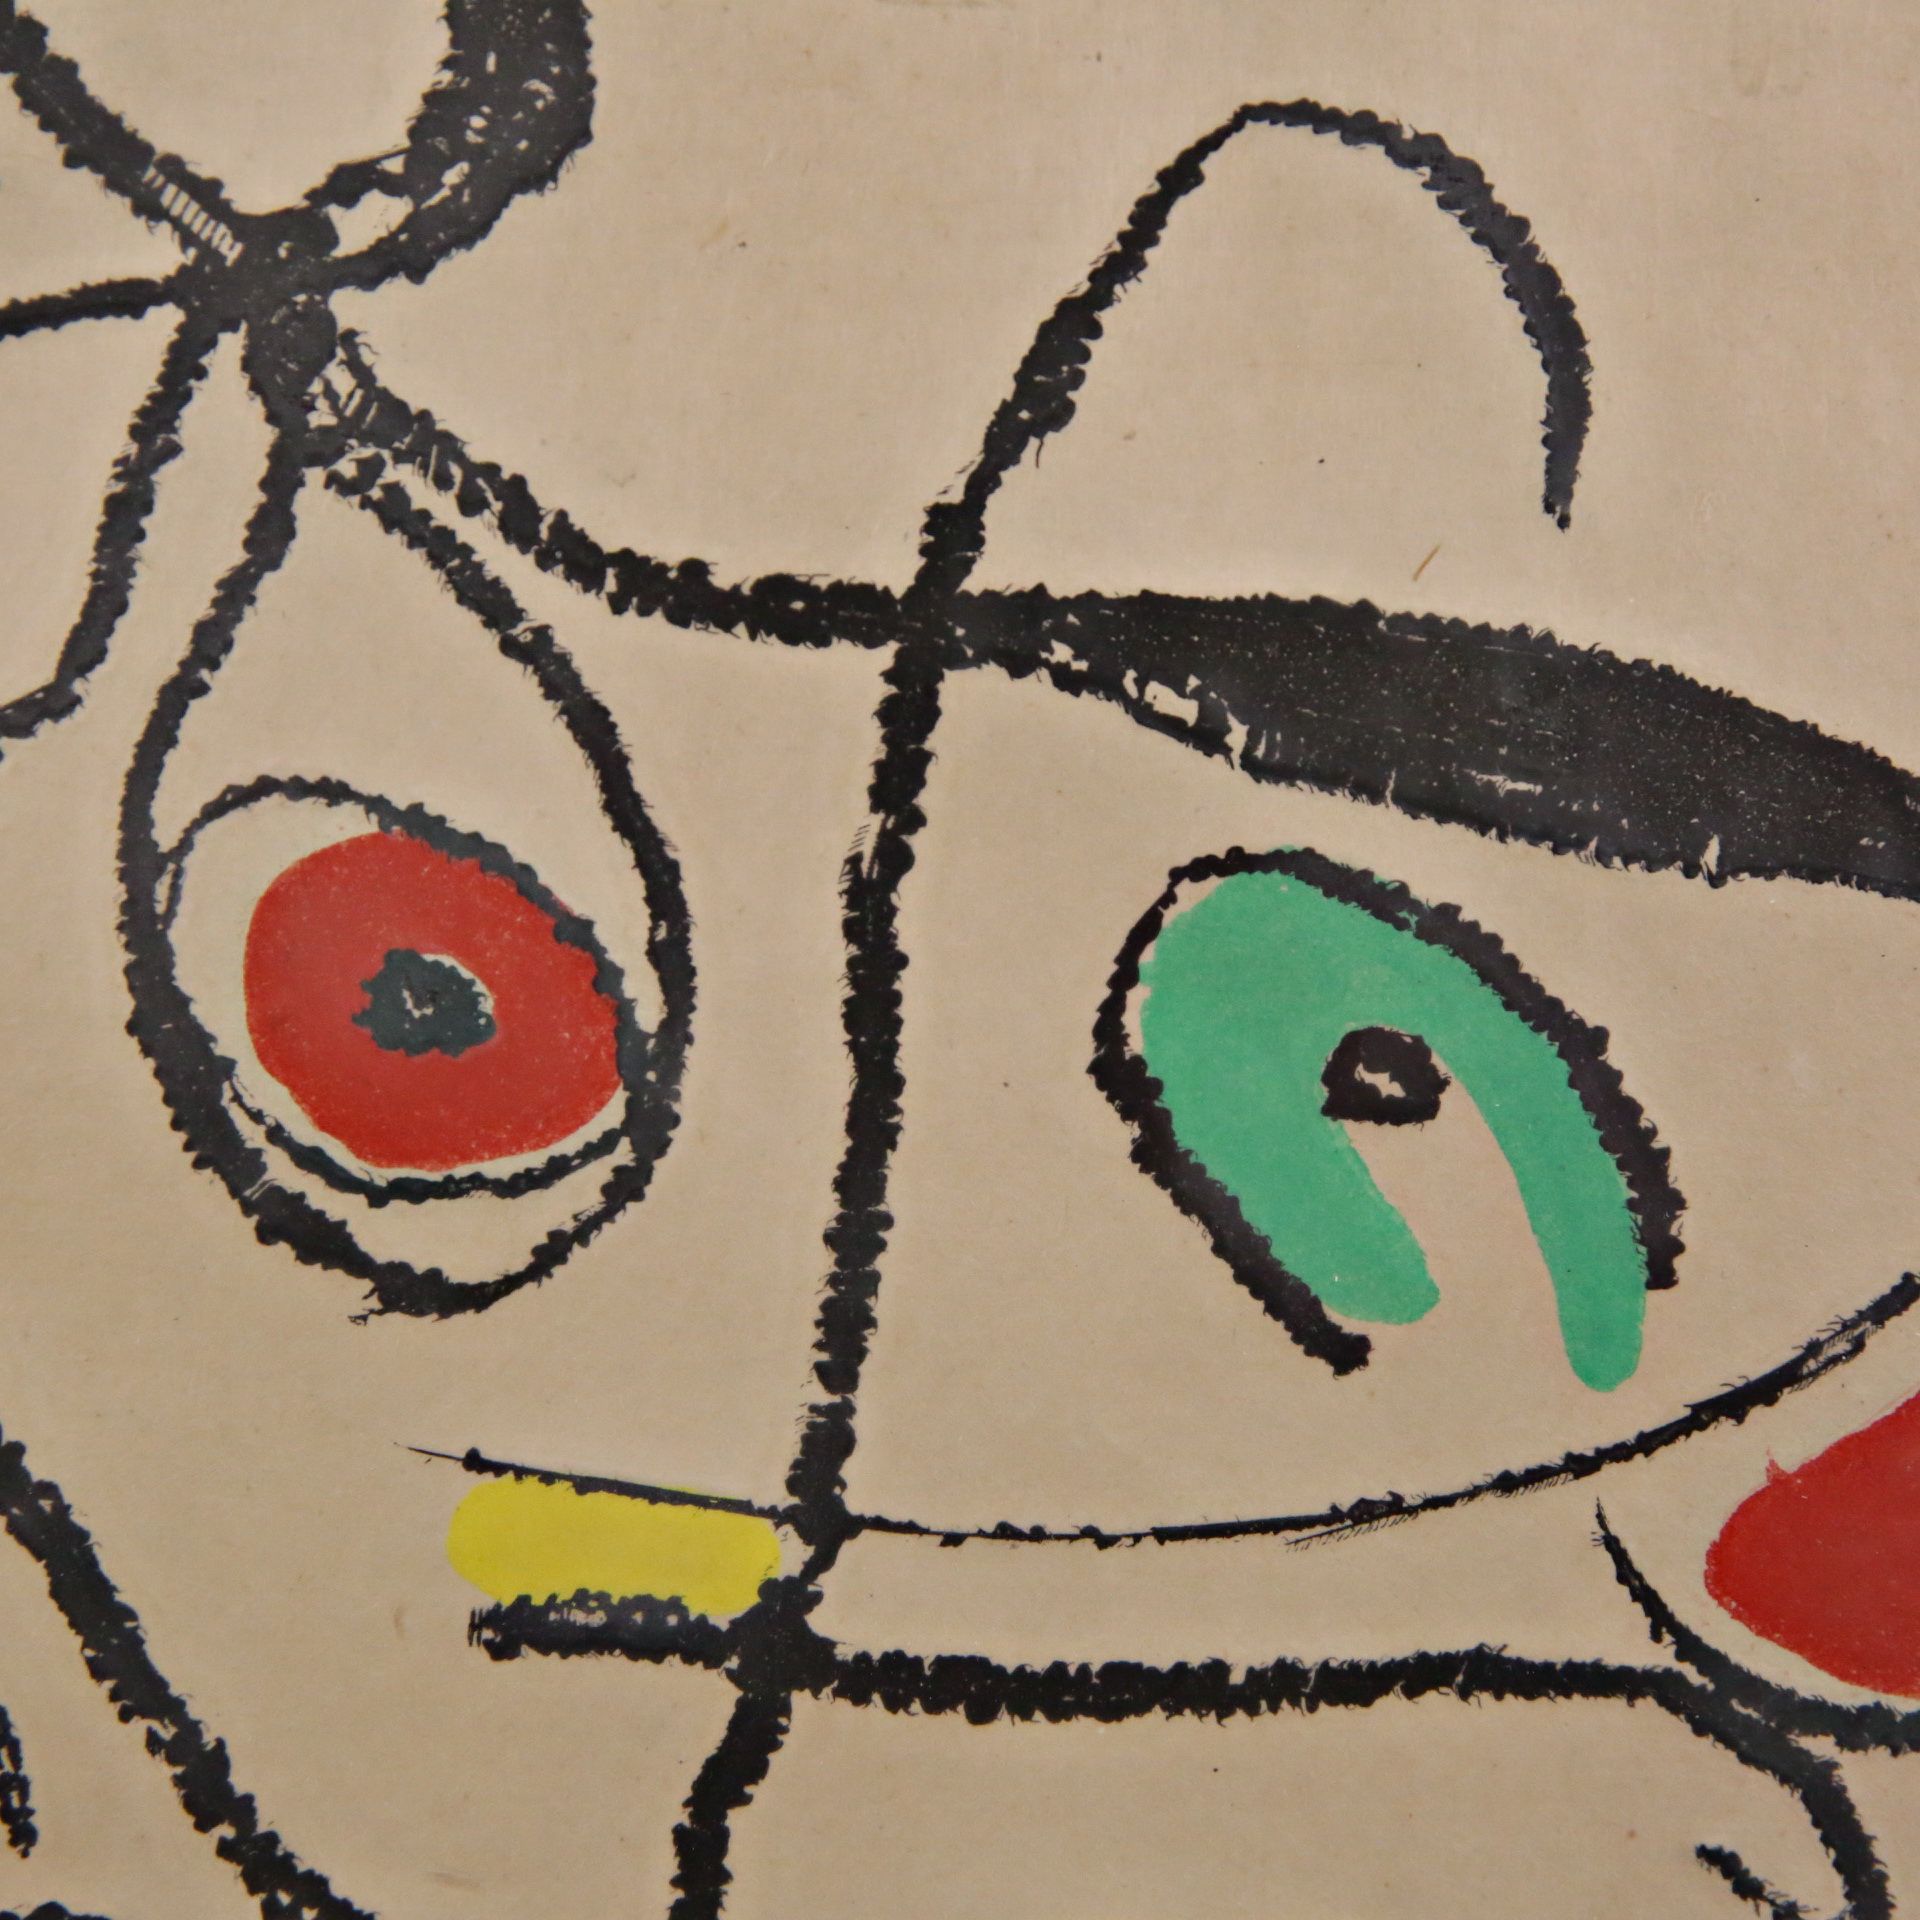 Joan MIRO (1893-1983) "Abstraction", lithographie, signed EA for Iliazd, - Image 3 of 3